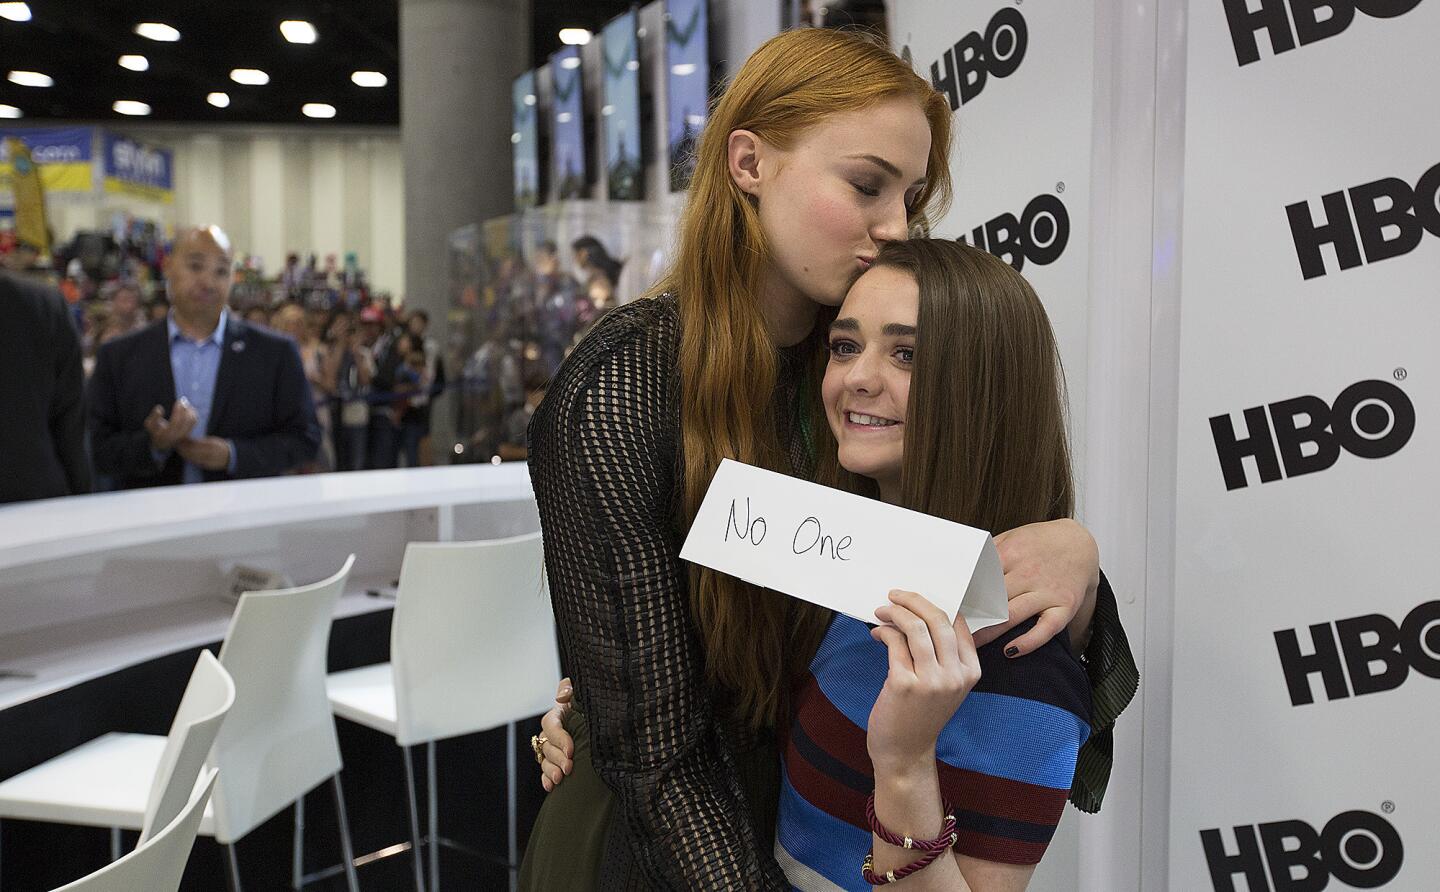 Meet and greet time for 'Game of Thrones' cast